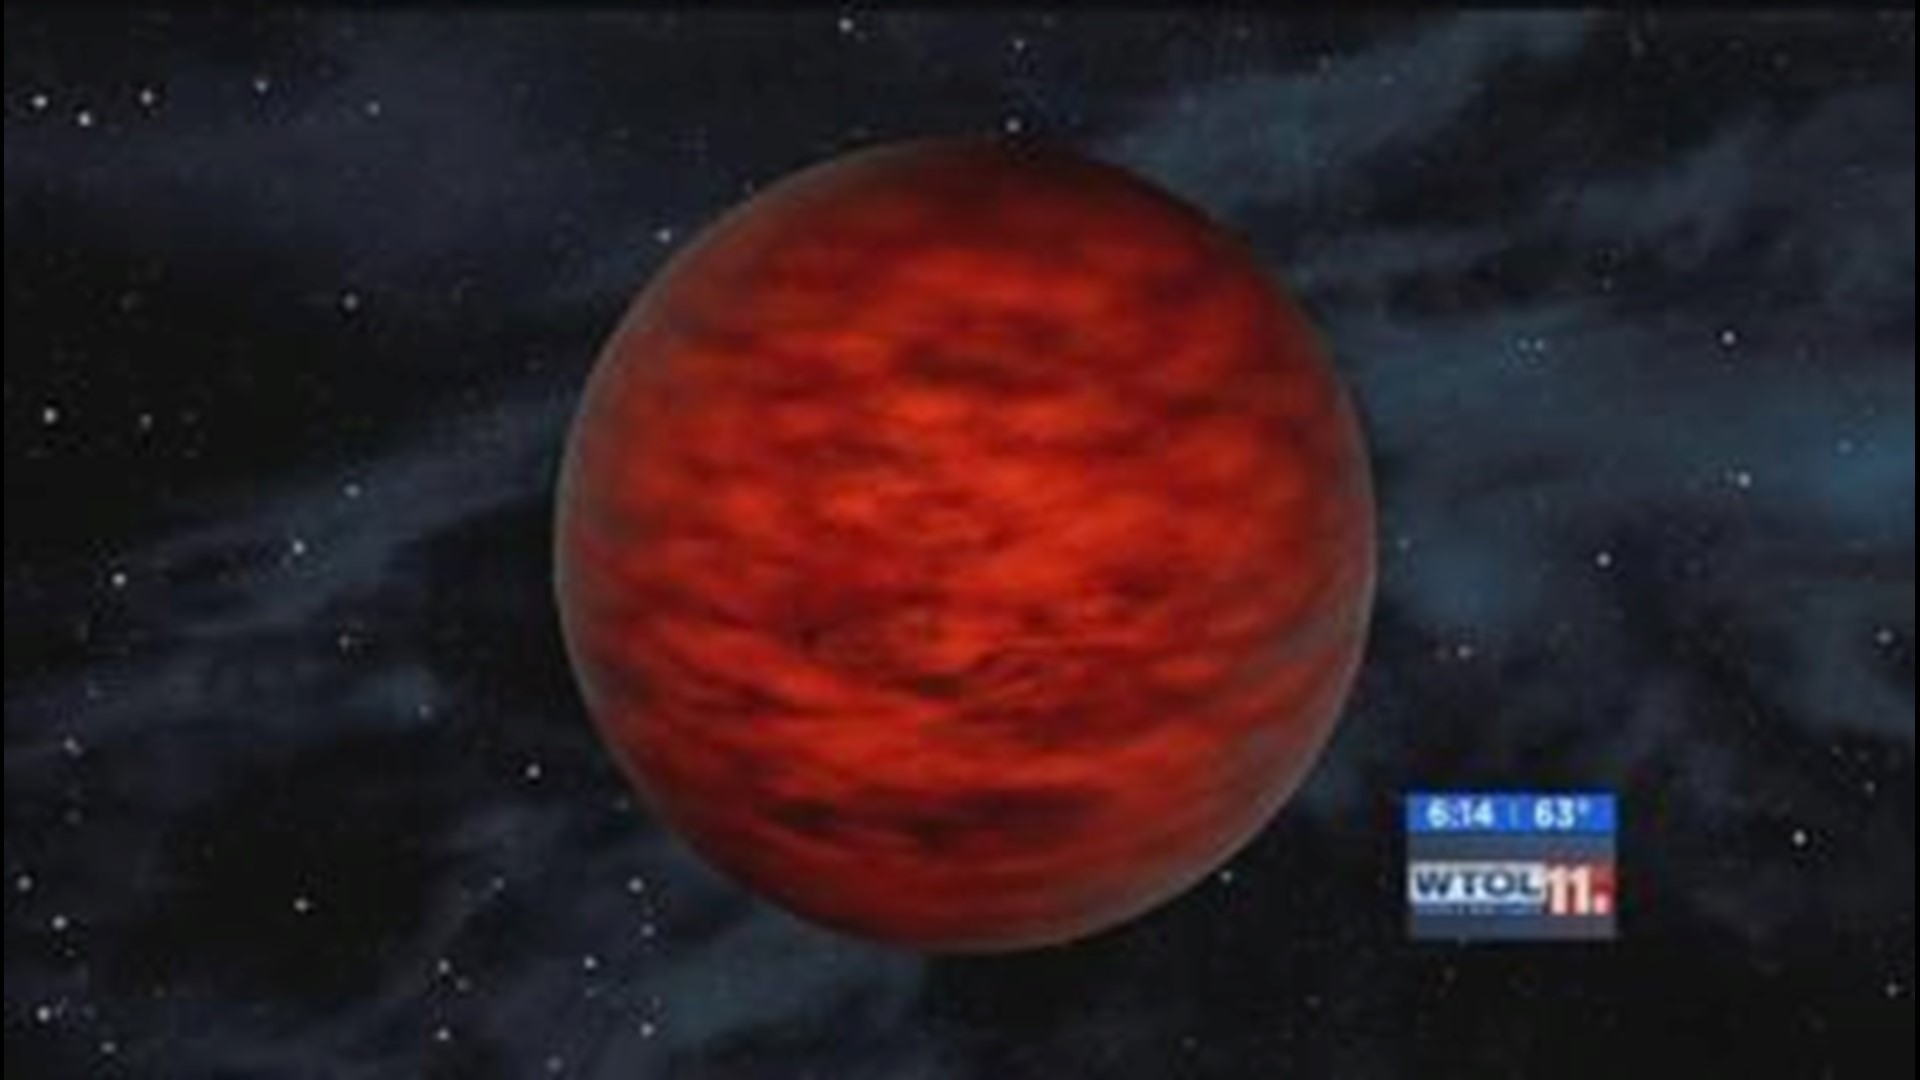 UT researchers find new planetary mass